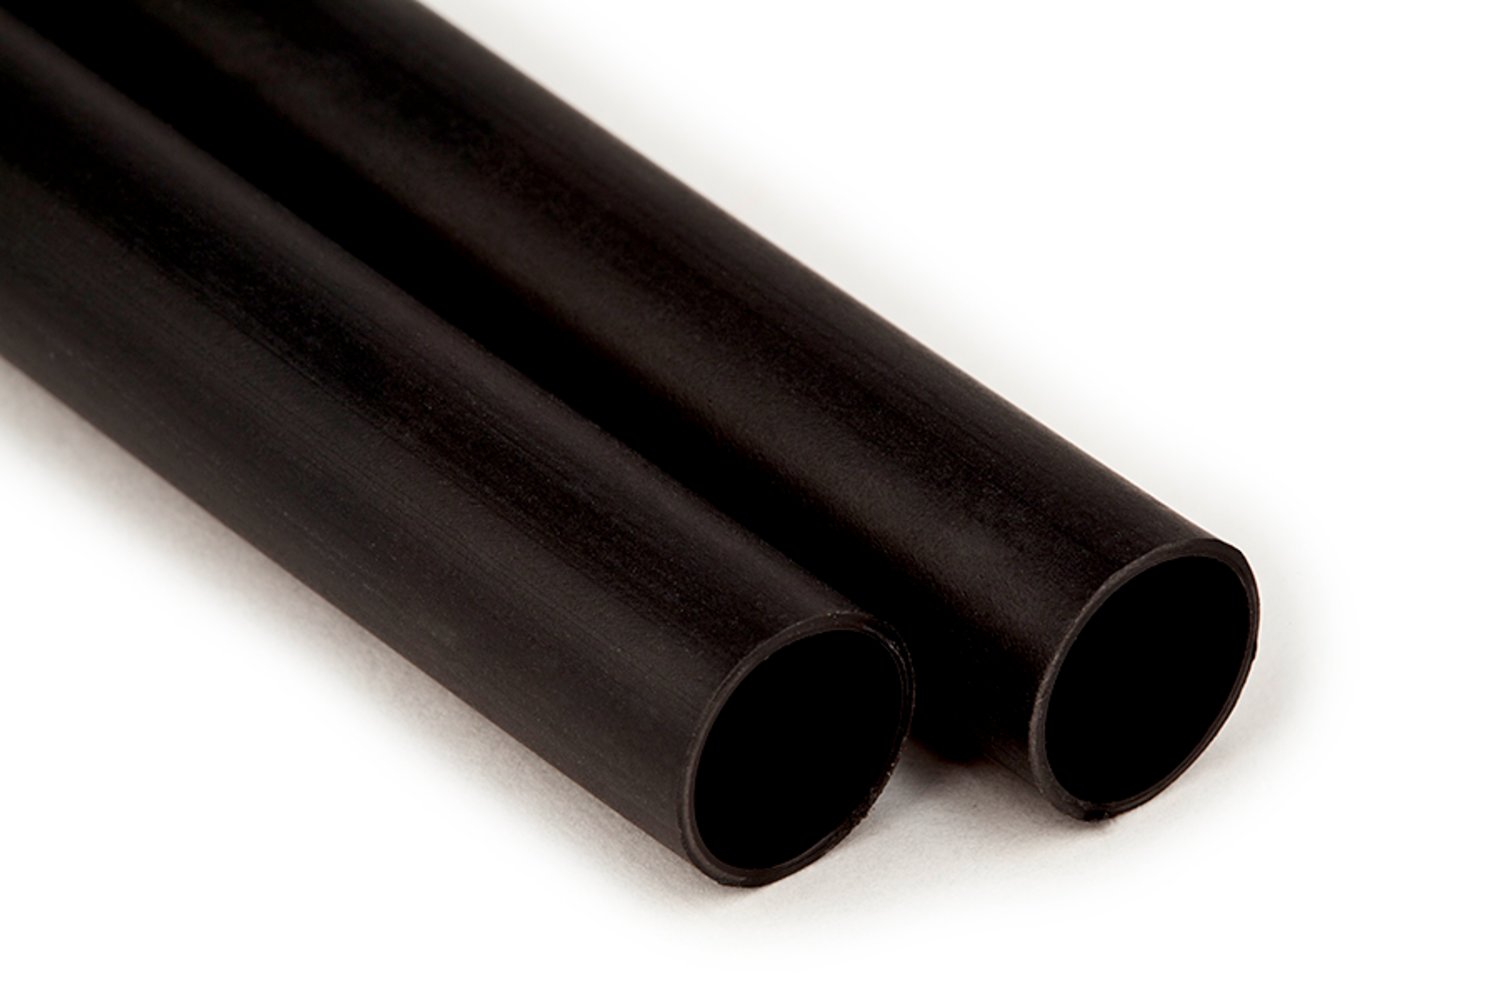 7000133623 - 3M Heat Shrink Multiple-Wall Polyolefin Tubing EPS400-.700-48"-Black-45
Pcs, 48 in length sticks, 45 pieces/case